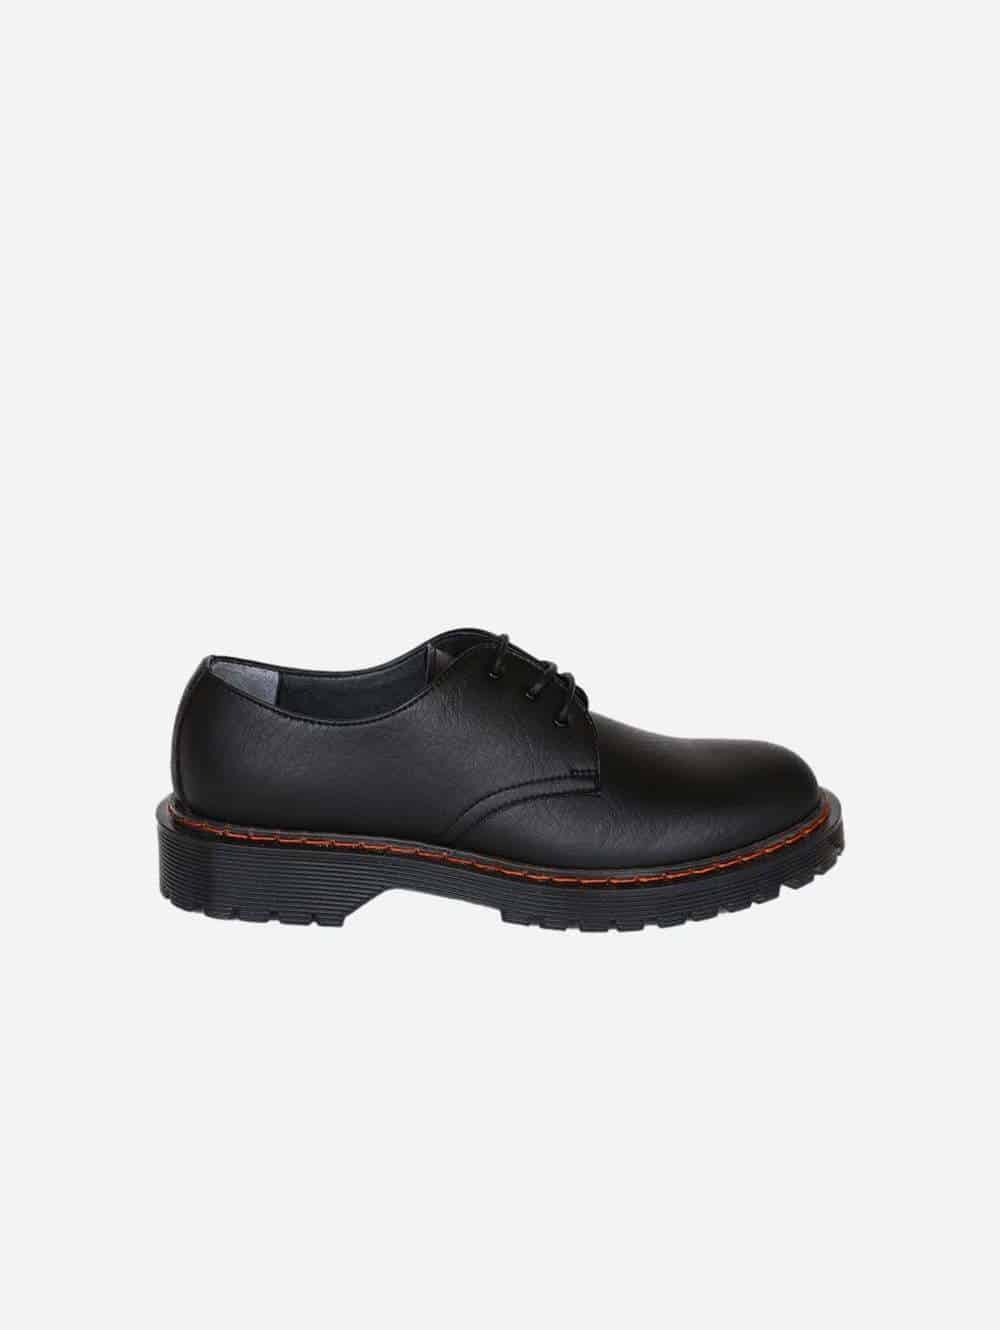 Good guys dont wear leather black vegan oxford shoes